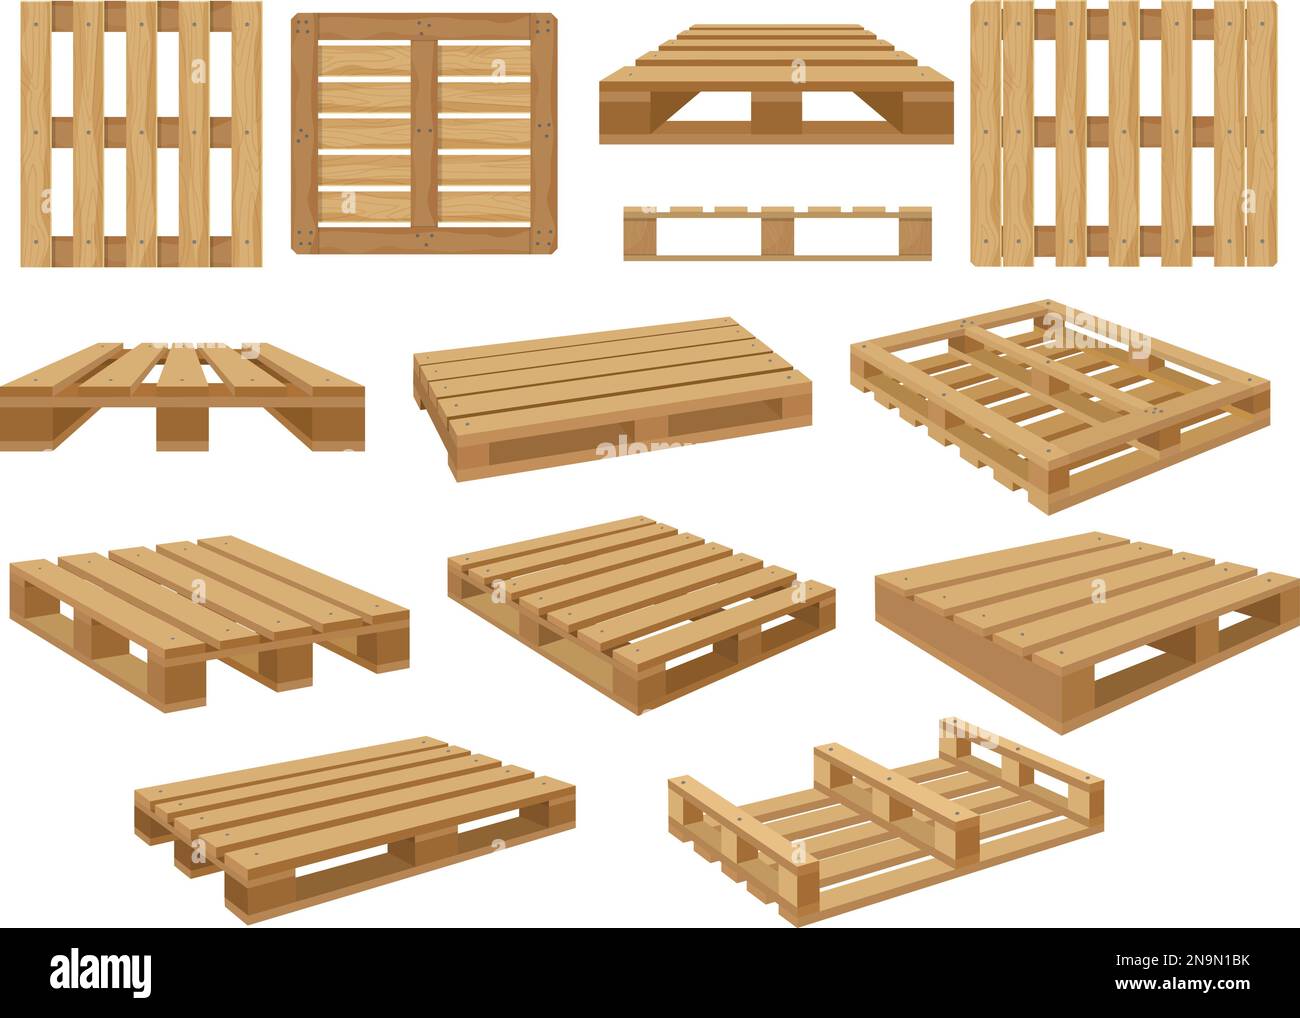 Warehouse pallet. Wooden containers for stacking shopping products recent vector illustrations isolated Stock Vector